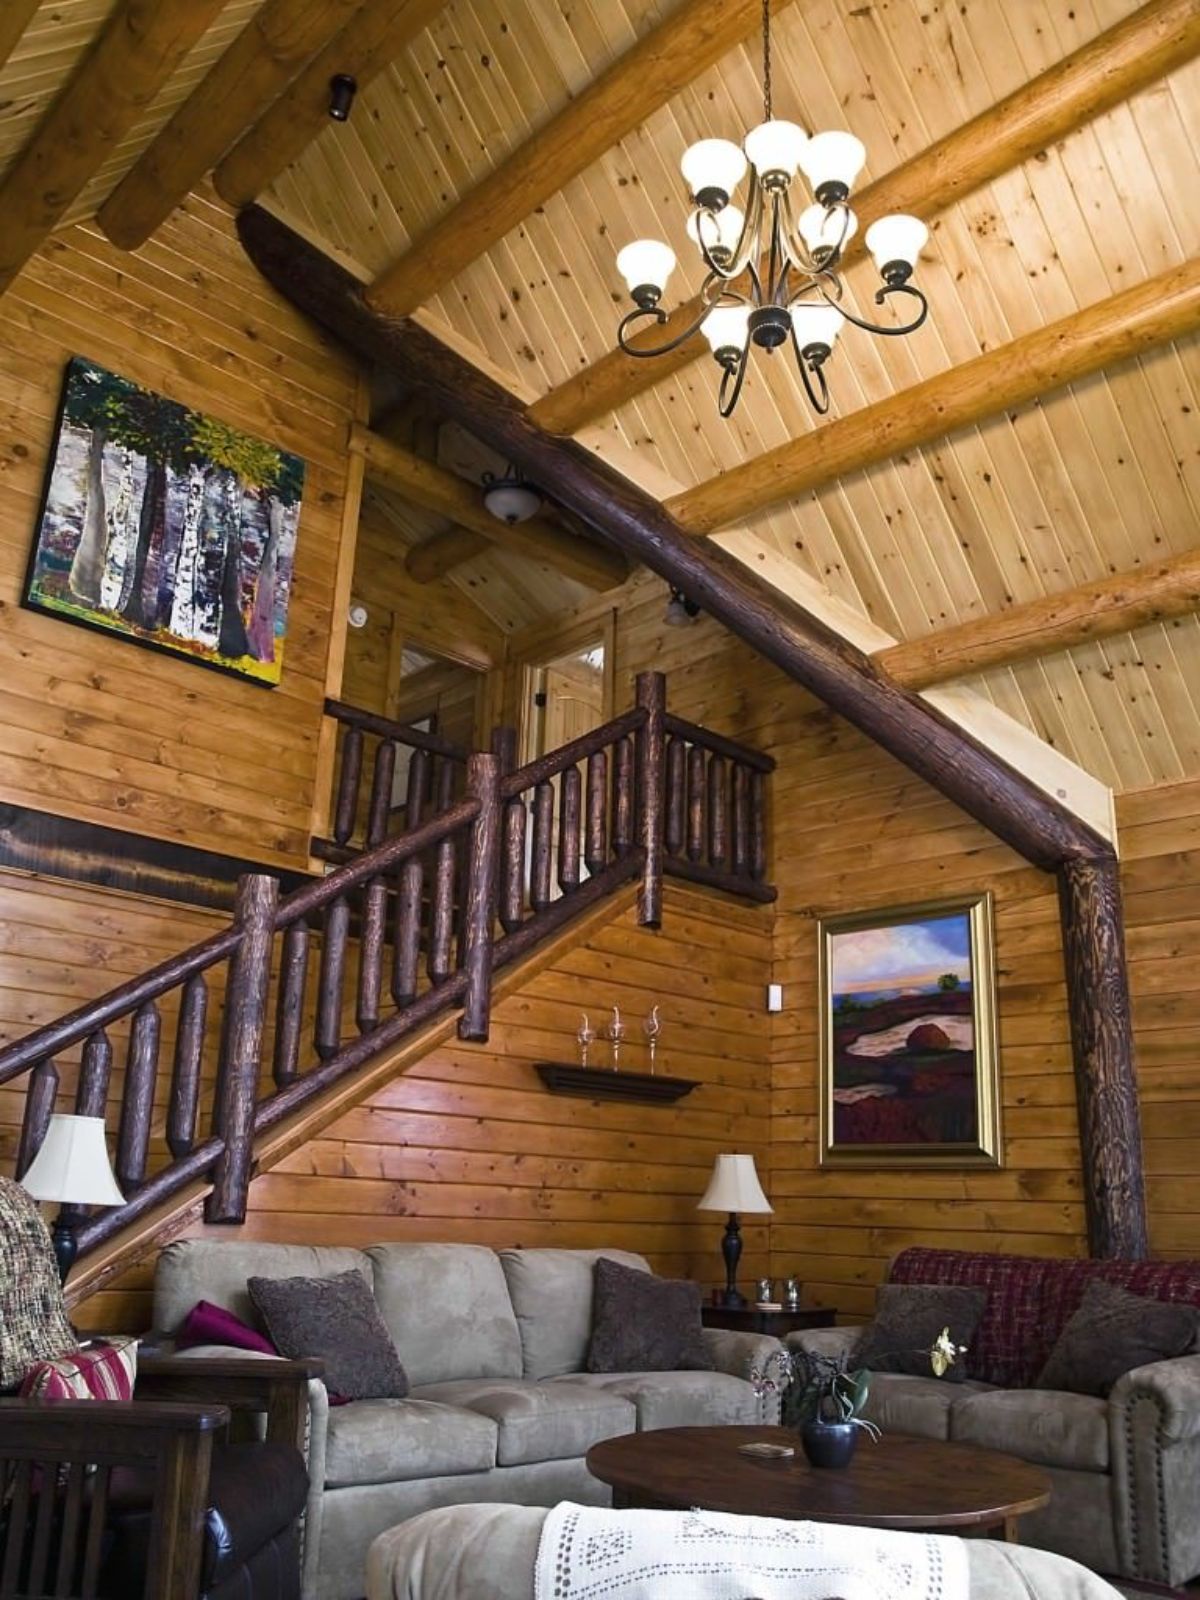 gray sofa against stairs in log cabin with chandelier on log cabin ceiling